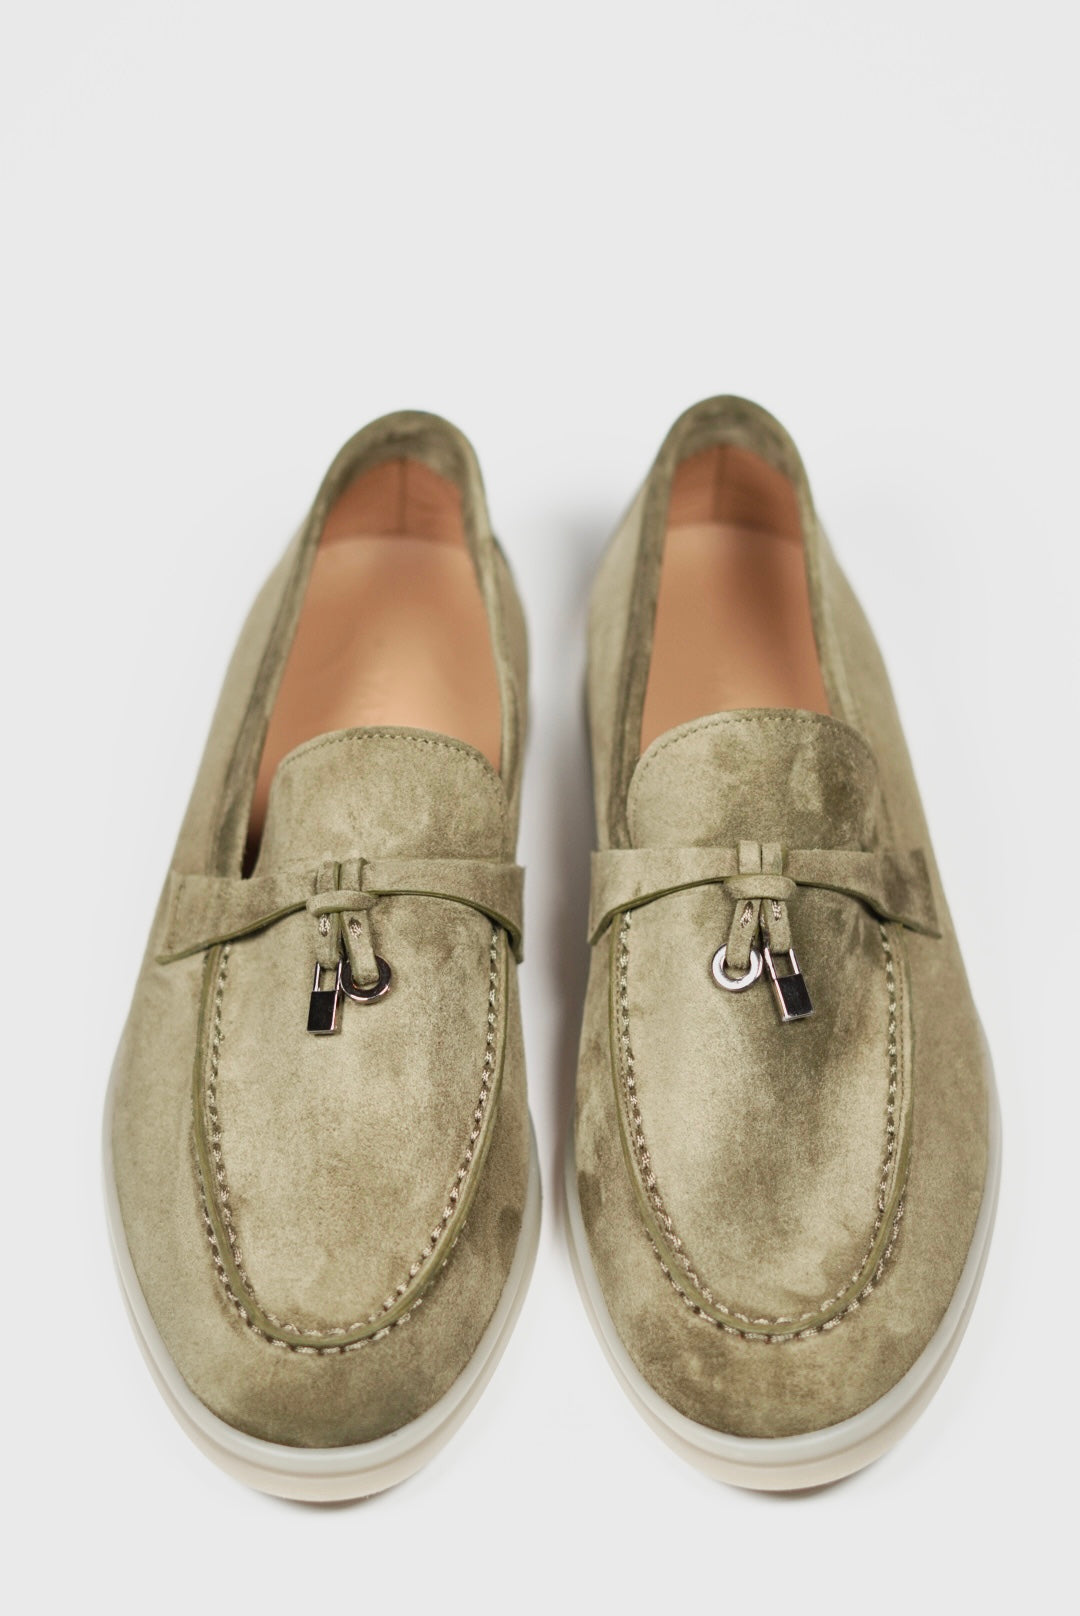 Women's Genuine Suede Loafers Moccasins Khaki